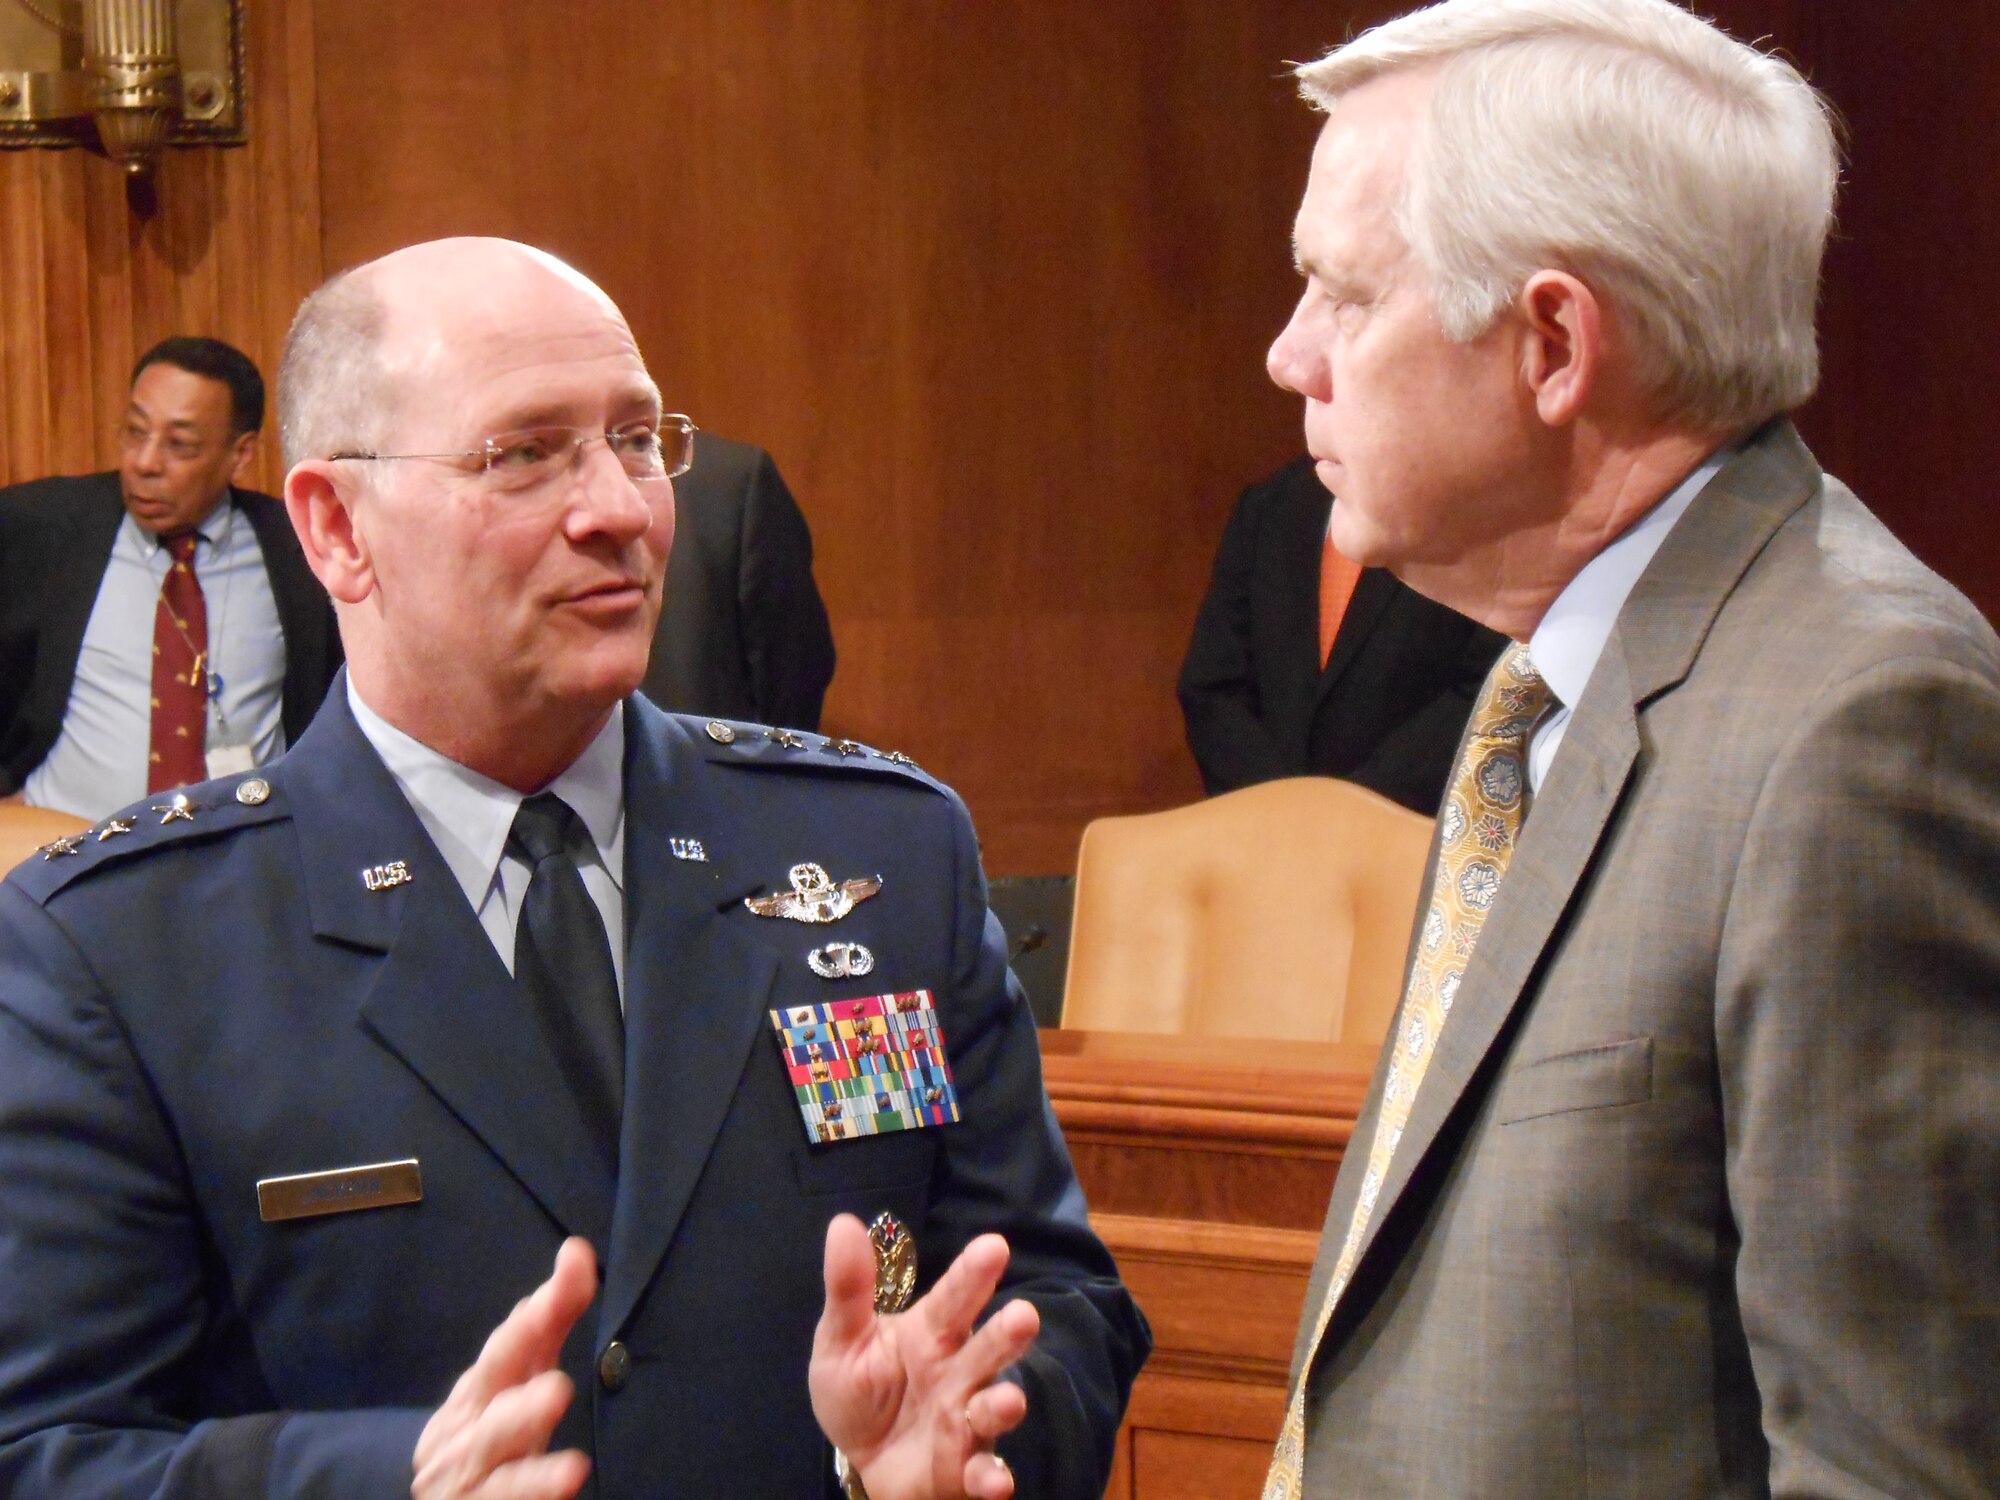 Lieutenant General James F. Jackson, discusses the proposed FY14 budget of the Air Force Reserve with retired Air Force Maj. Gen. Tom Carter, on Capitol Hill, April 17.  The top leaders from Army, Navy, Marine and Air Force Reserve and National Guard programs provided statements and answered questions regarding the estimates for next year’s funding at the U.S. Senate Committee on Appropriations Subcommittee on Defense. (U.S. Air Force photo/Col. Bob Thompson)